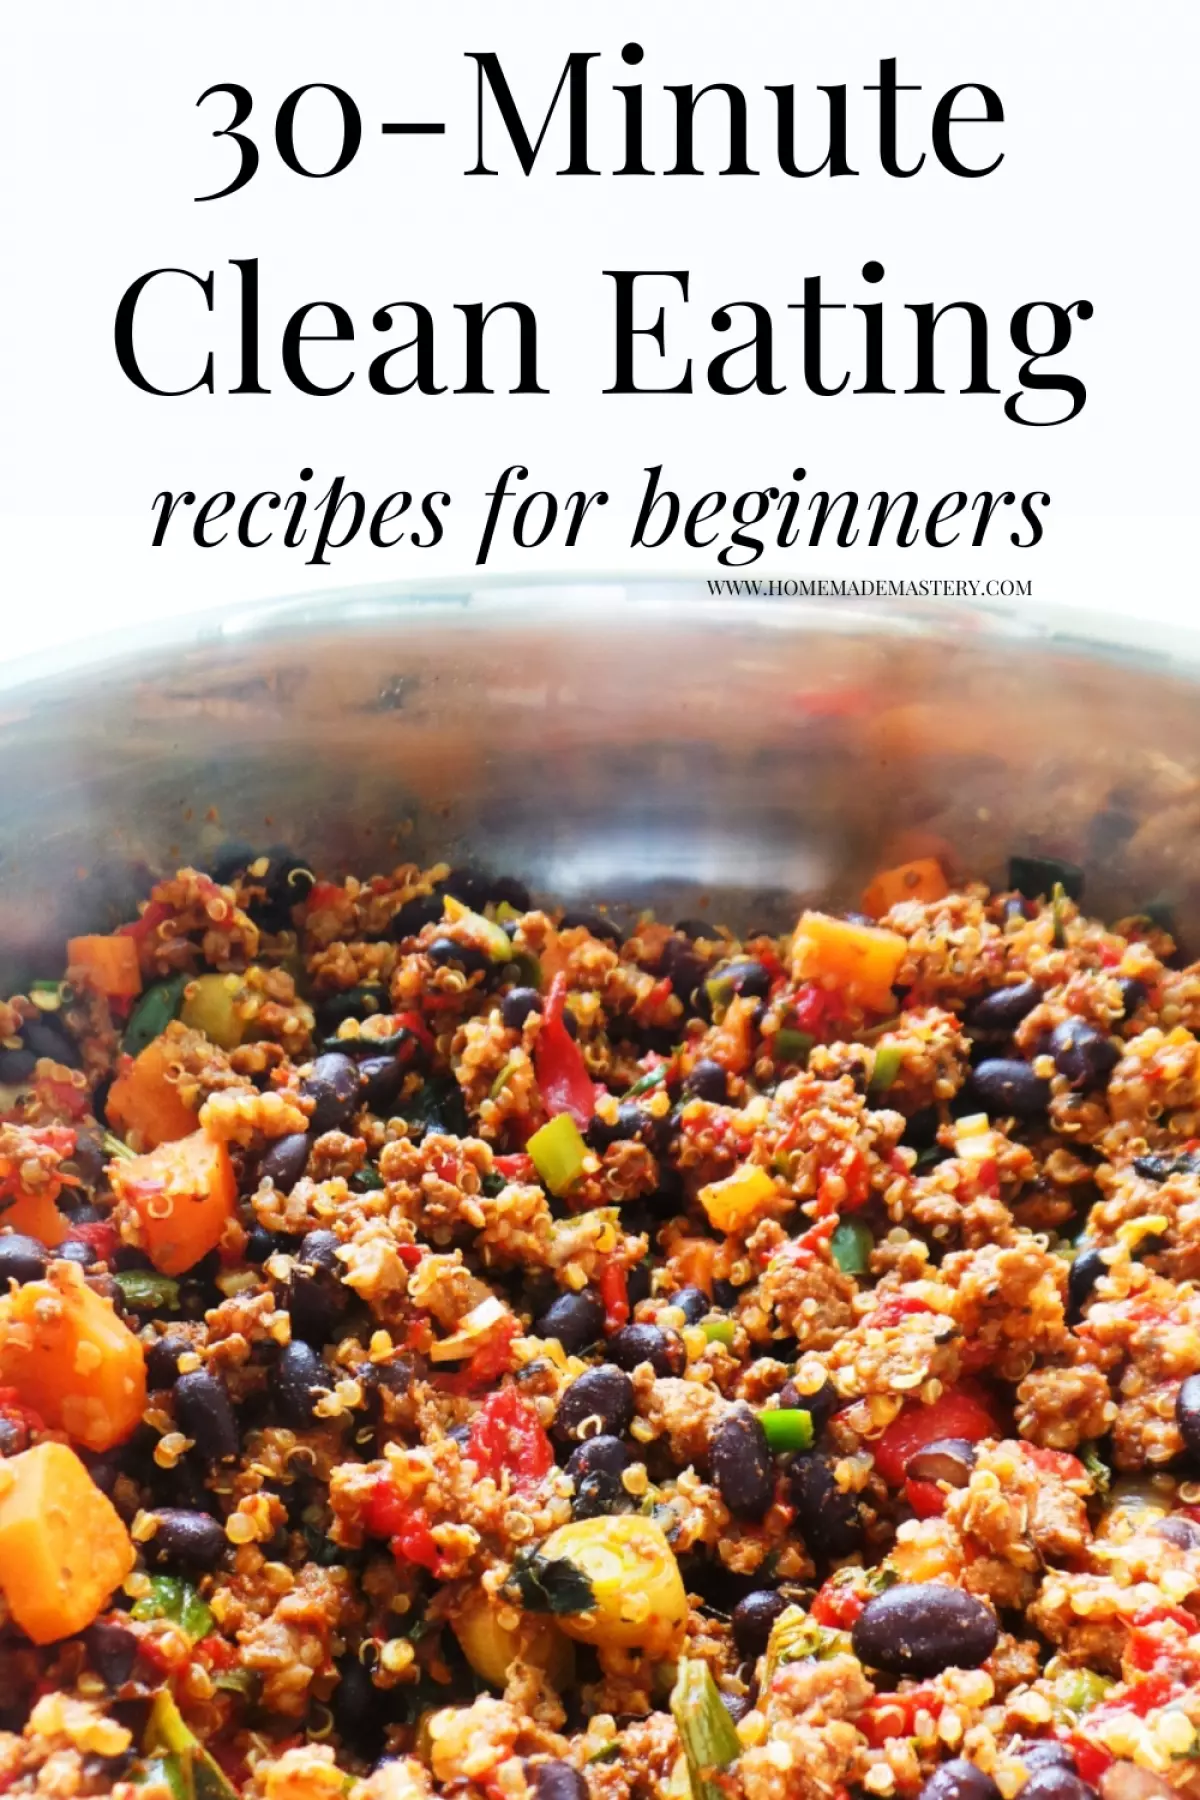 Start eating healthy with these easy clean eating recipes suitable for beginners and more experienced cooks alike! The collection includes healthy lunch and dinner ideas that you can make in 10-30 minutes.